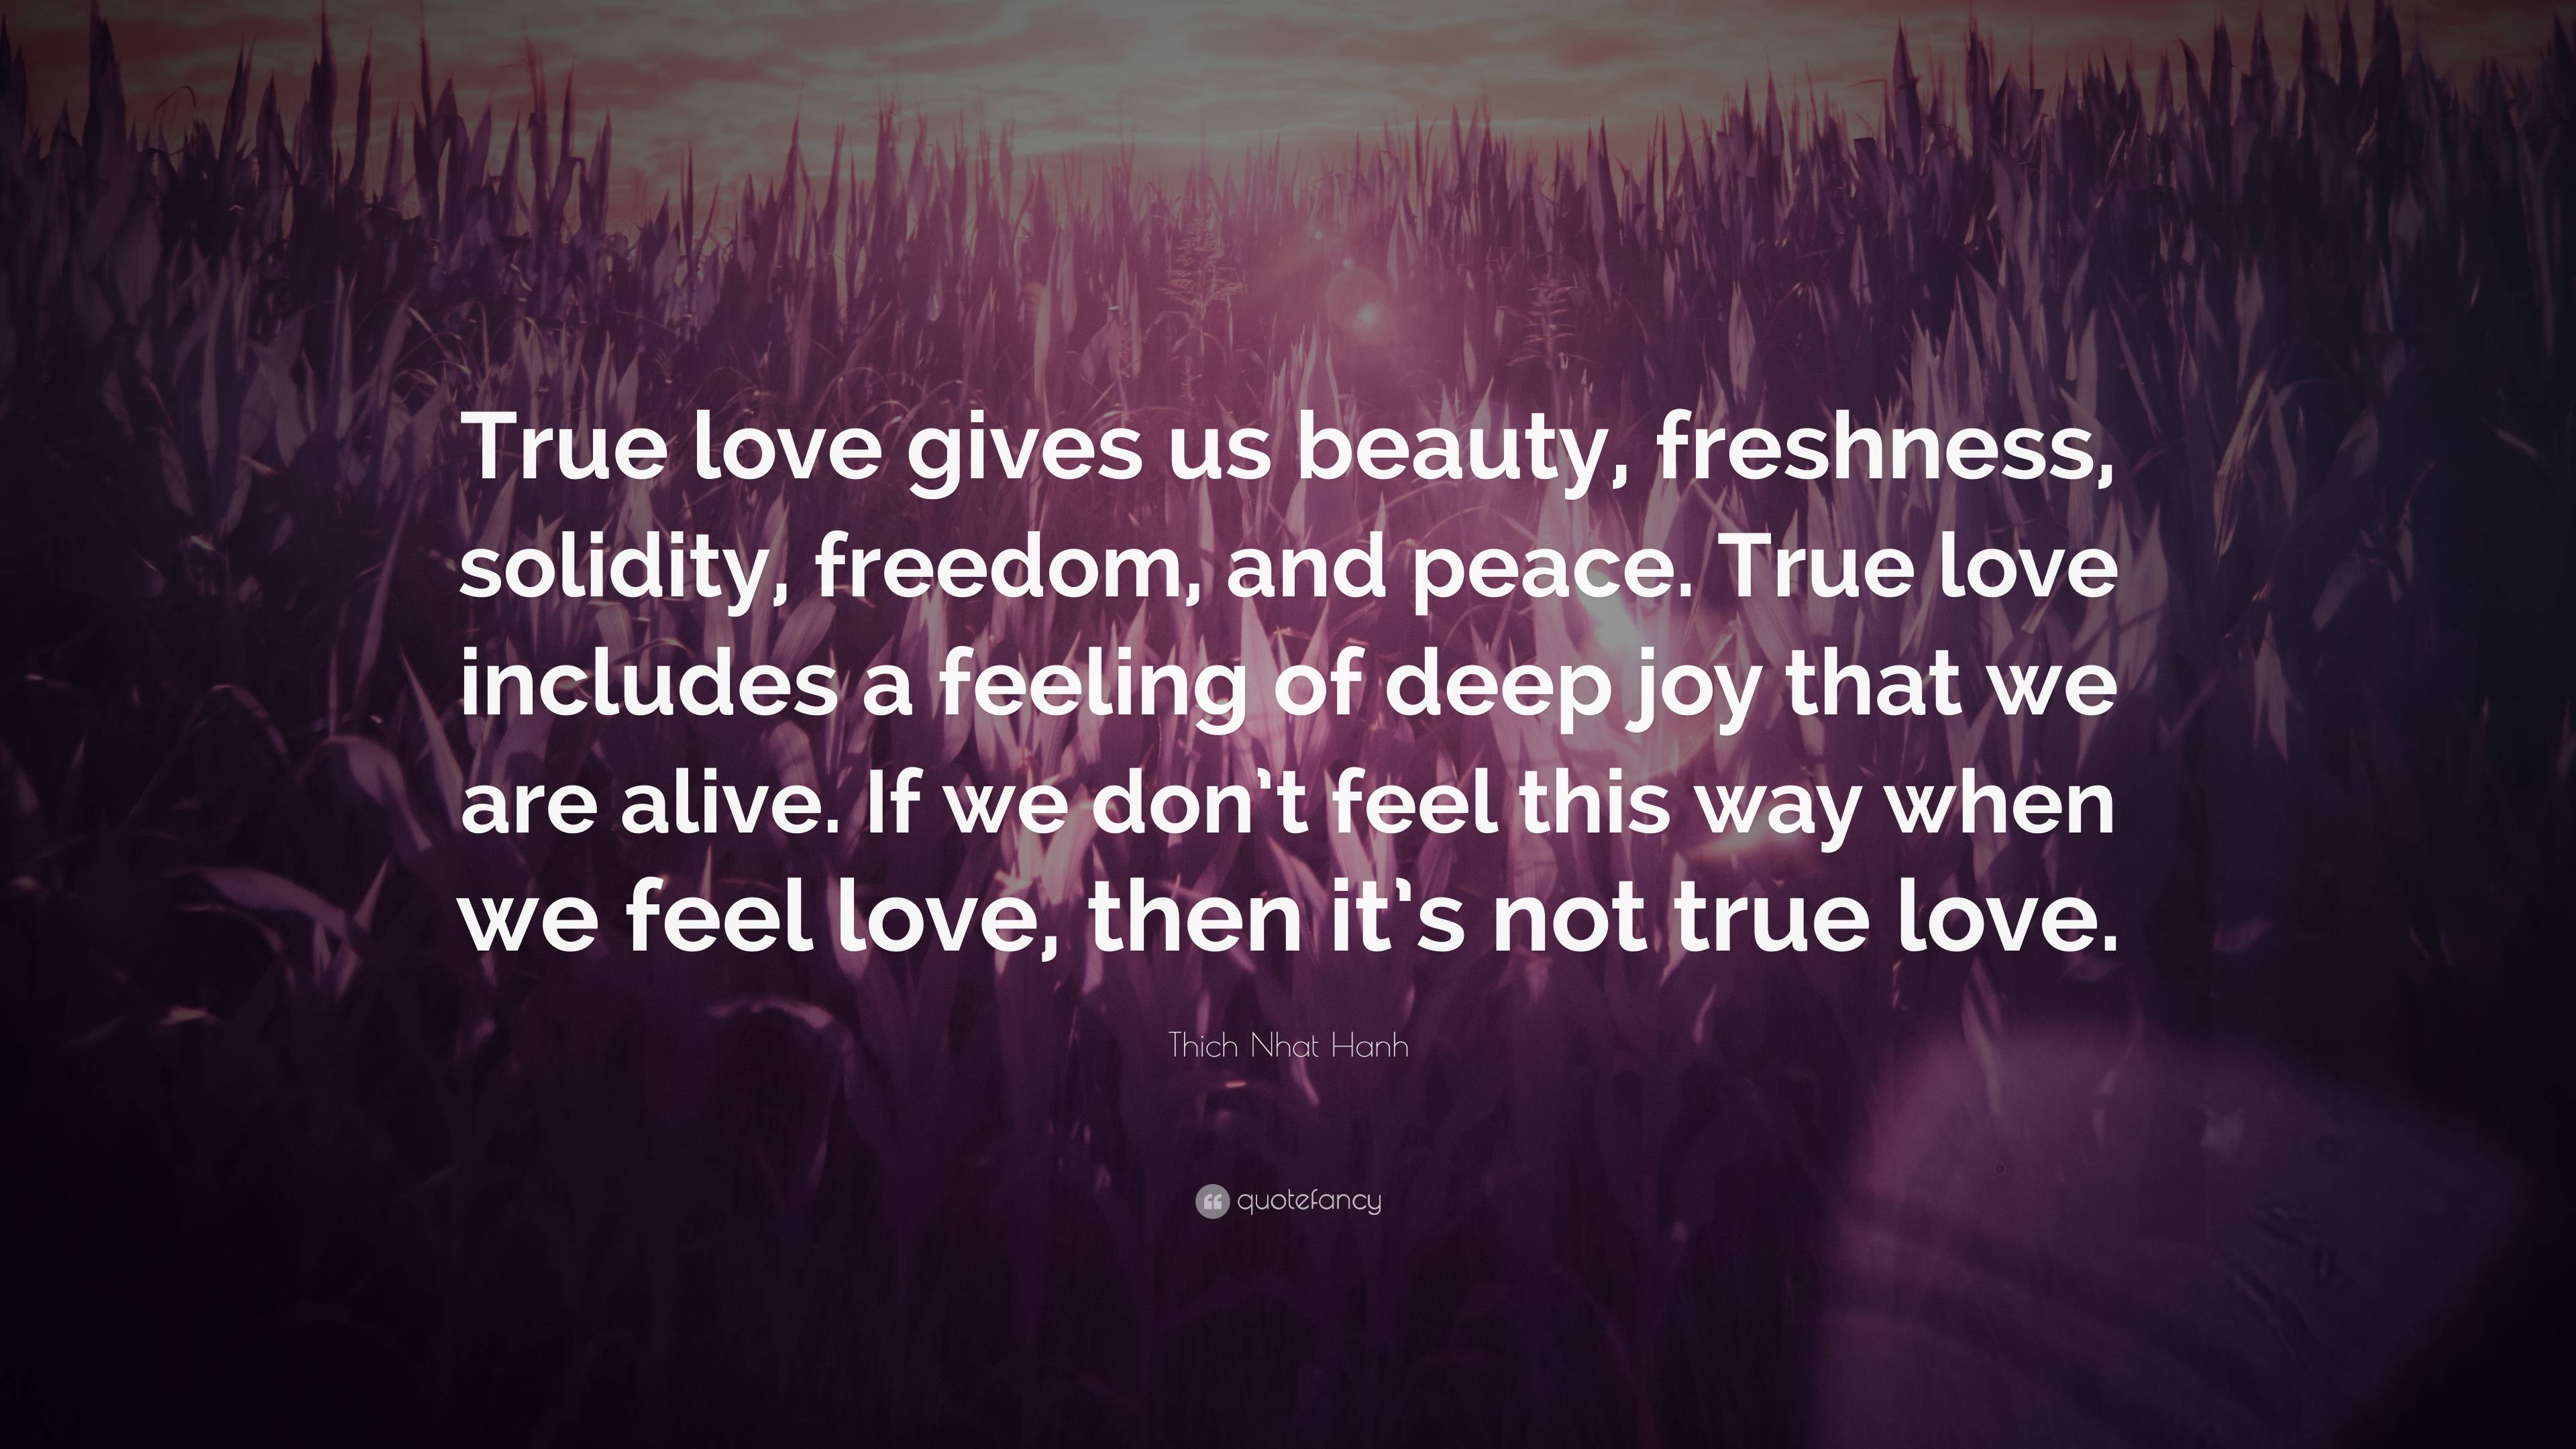 What is True love and what does it feel like?